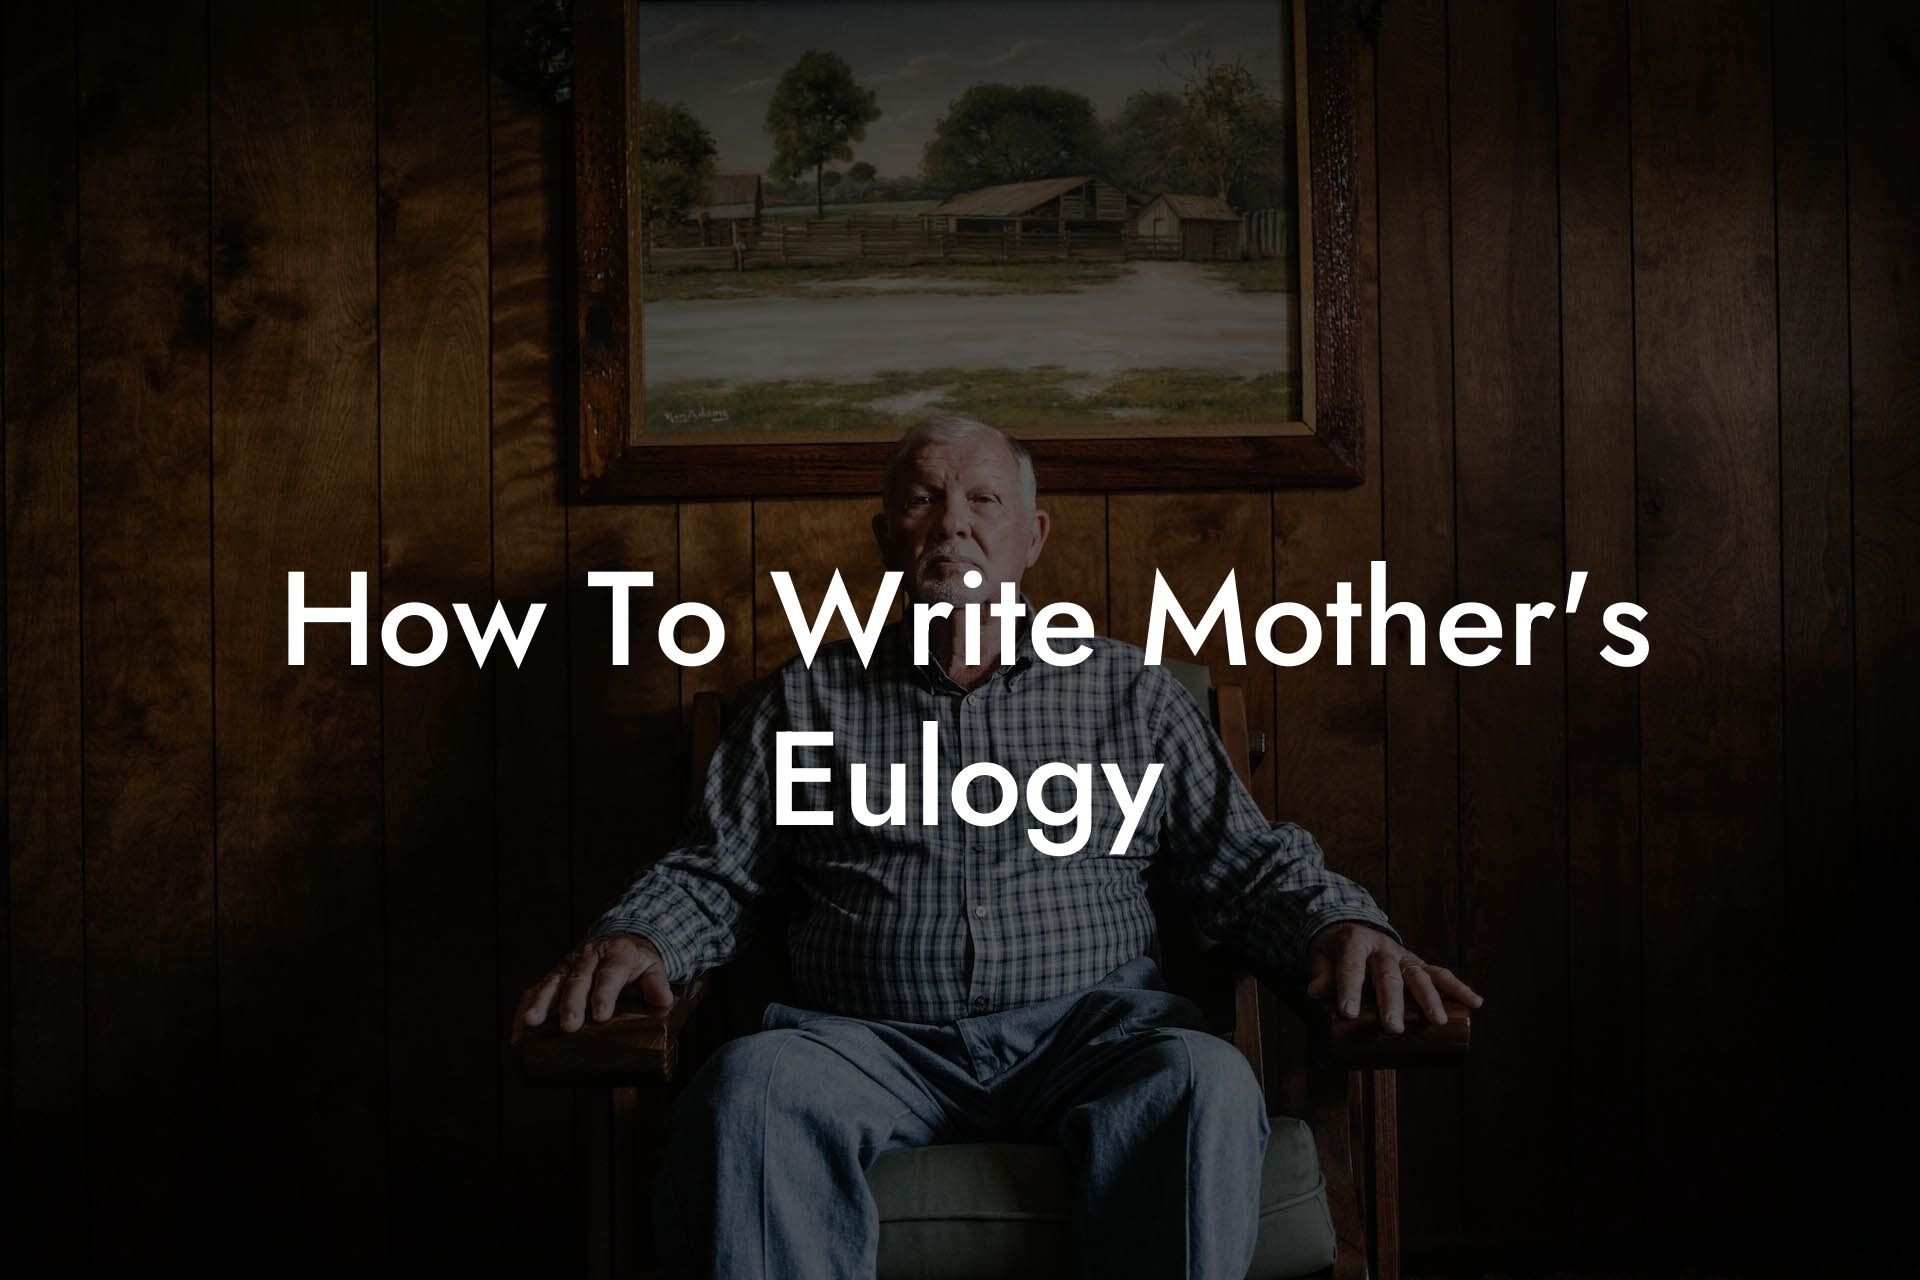 How To Write Mother's Eulogy